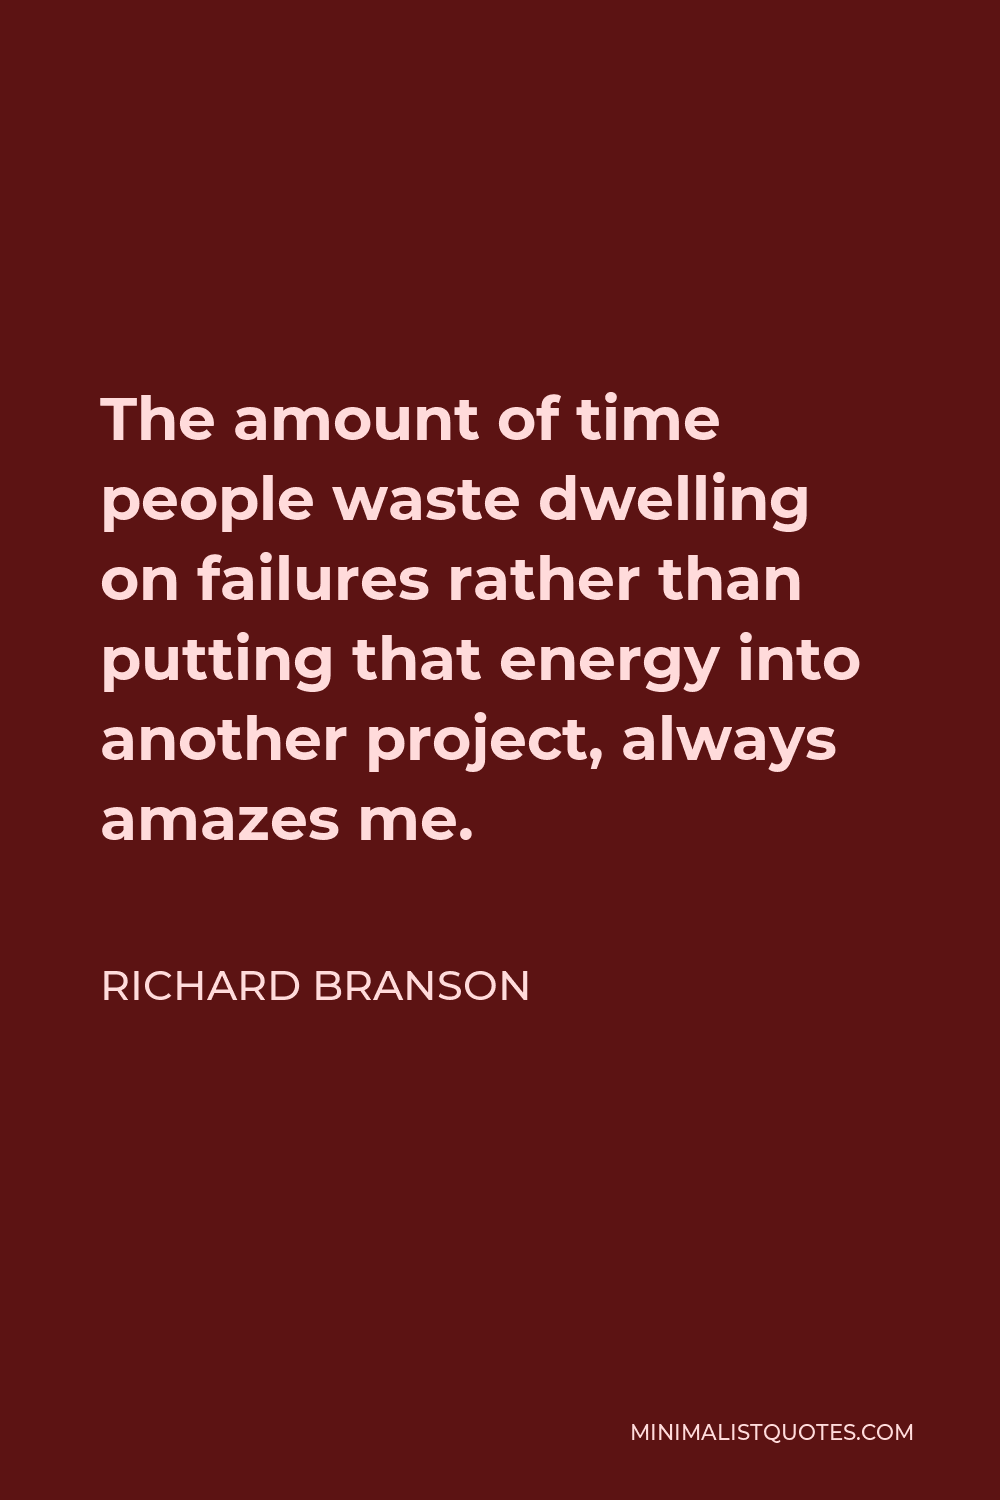 Richard Branson Quote - The amount of time people waste dwelling on failures rather than putting that energy into another project, always amazes me.